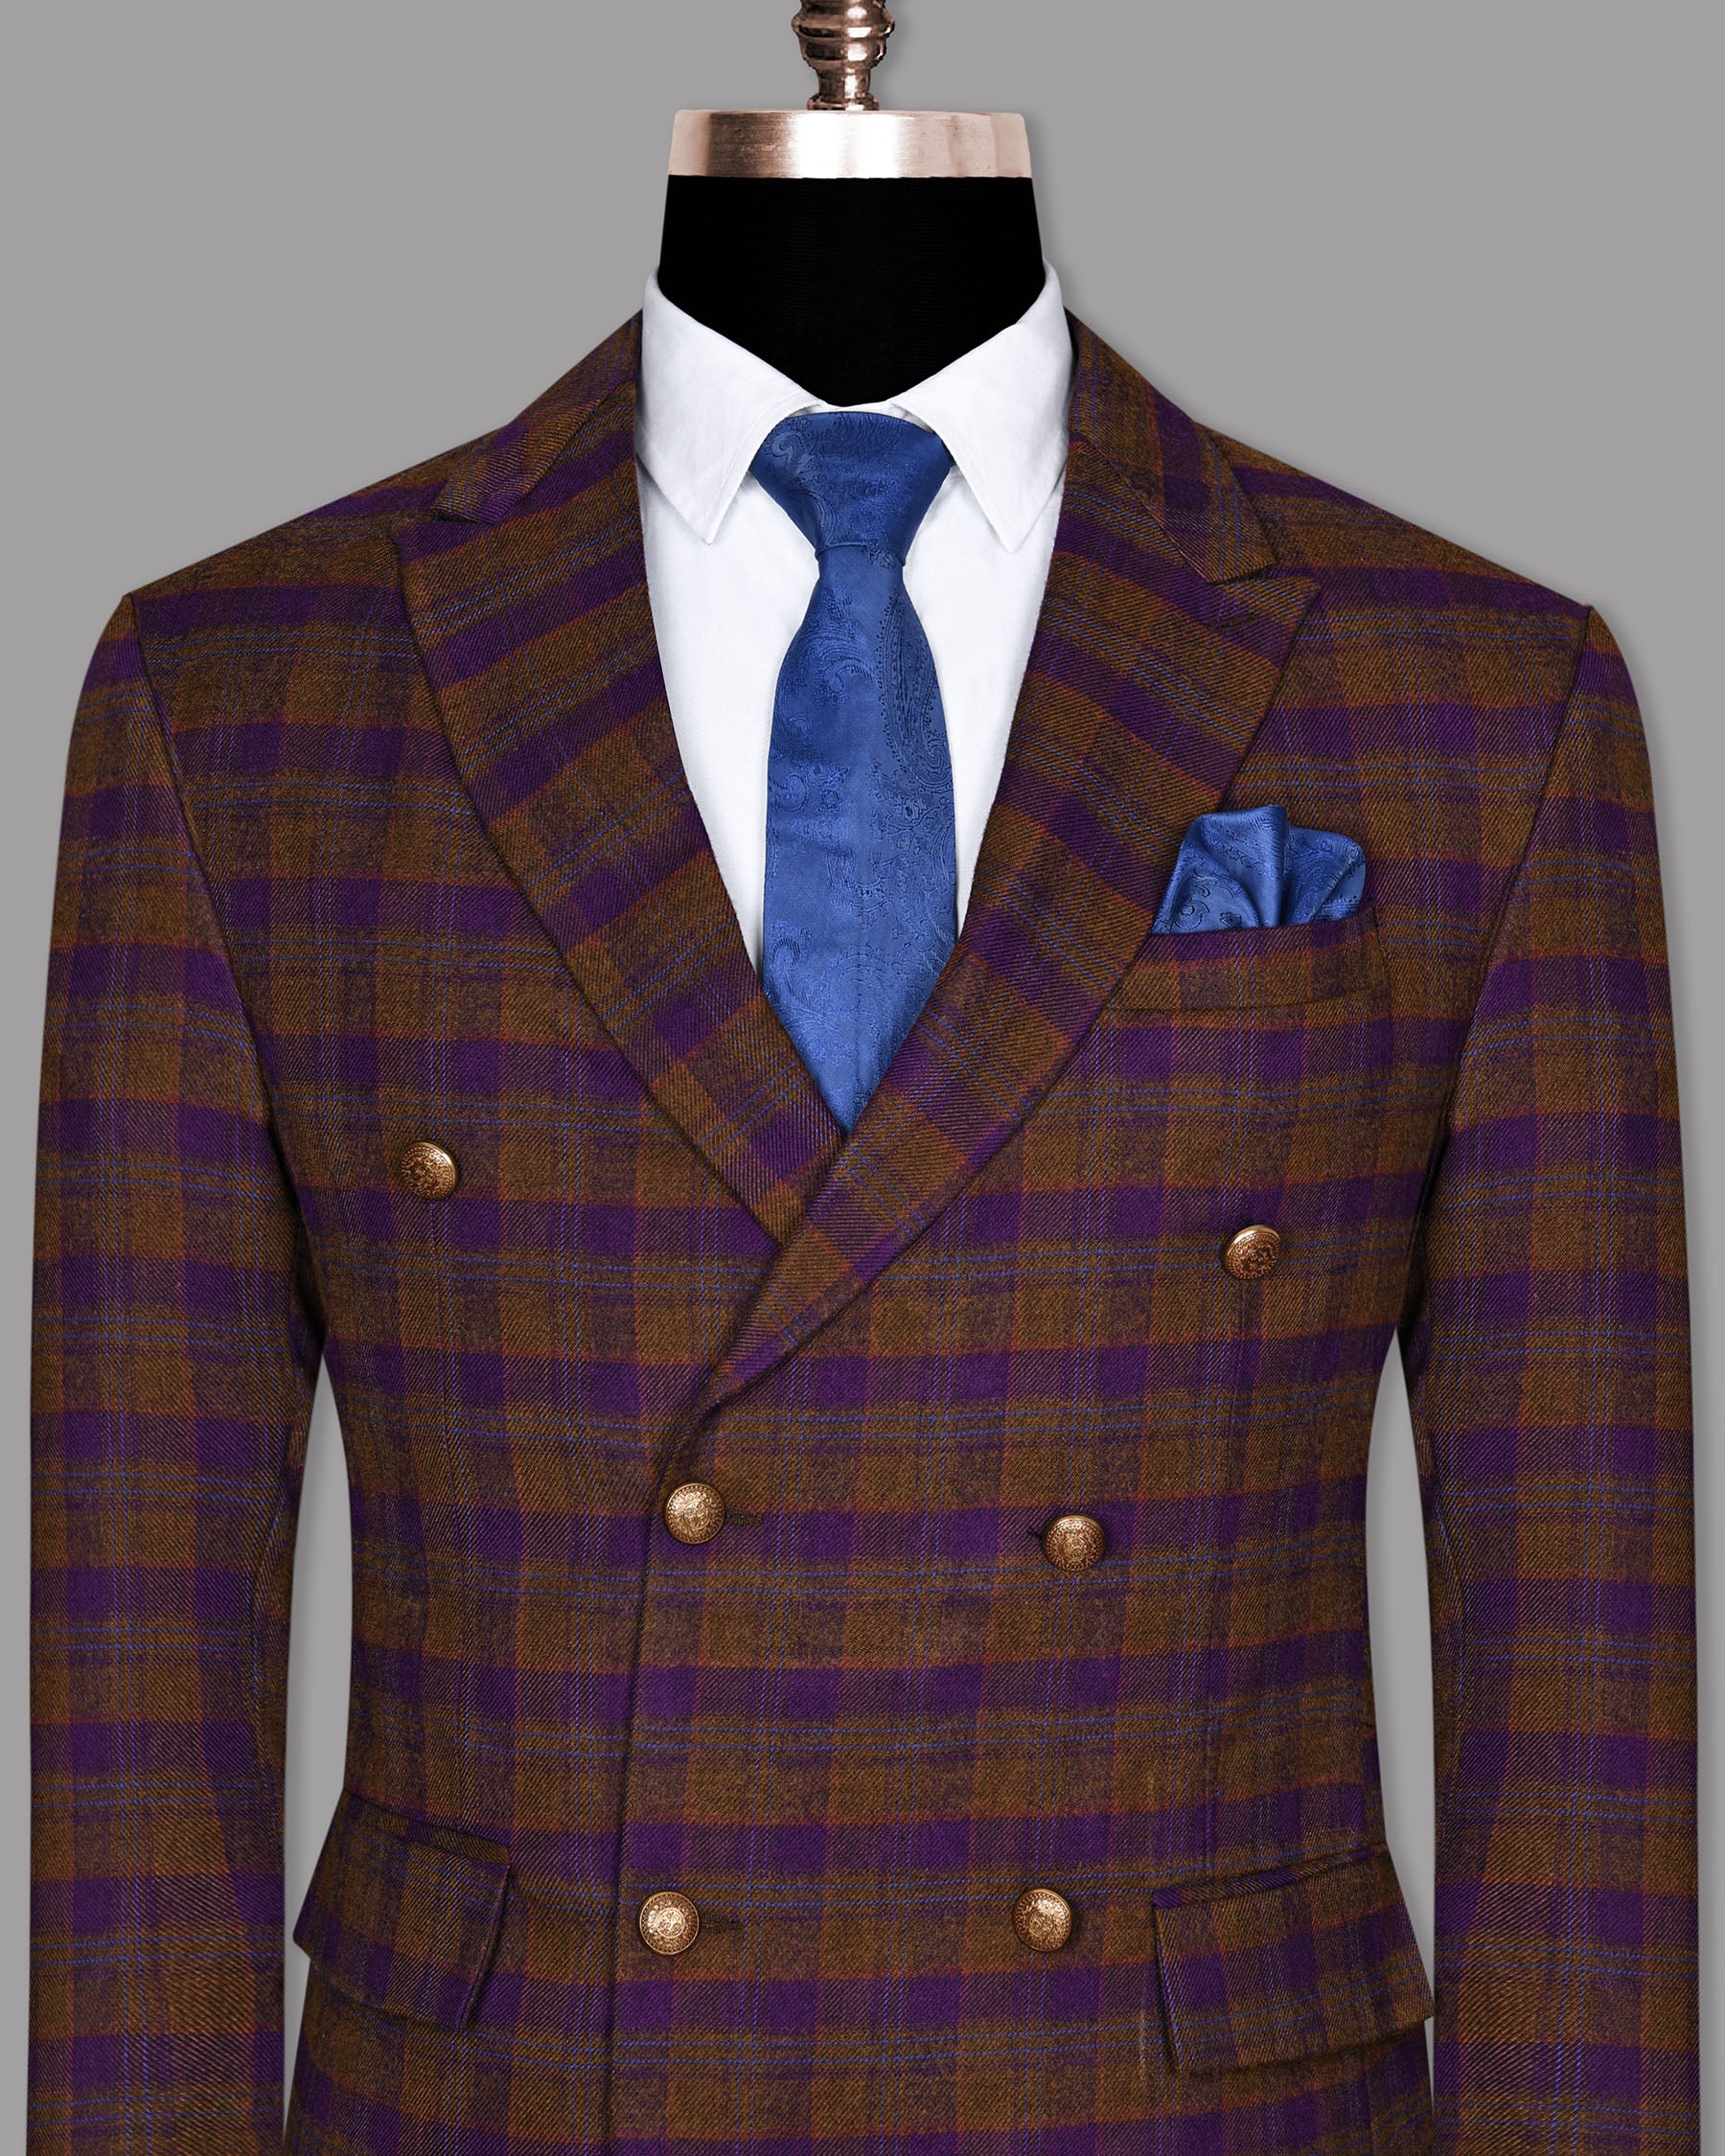 Brown with Purple Checked Flannel Wool Double Breasted Tweed Blazer BL687DB-52, BL687DB-54, BL687DB-60, BL687DB-36, BL687DB-38, BL687DB-40, BL687DB-42, BL687DB-44, BL687DB-48, BL687DB-50, BL687DB-56, BL687DB-46, BL687DB-58